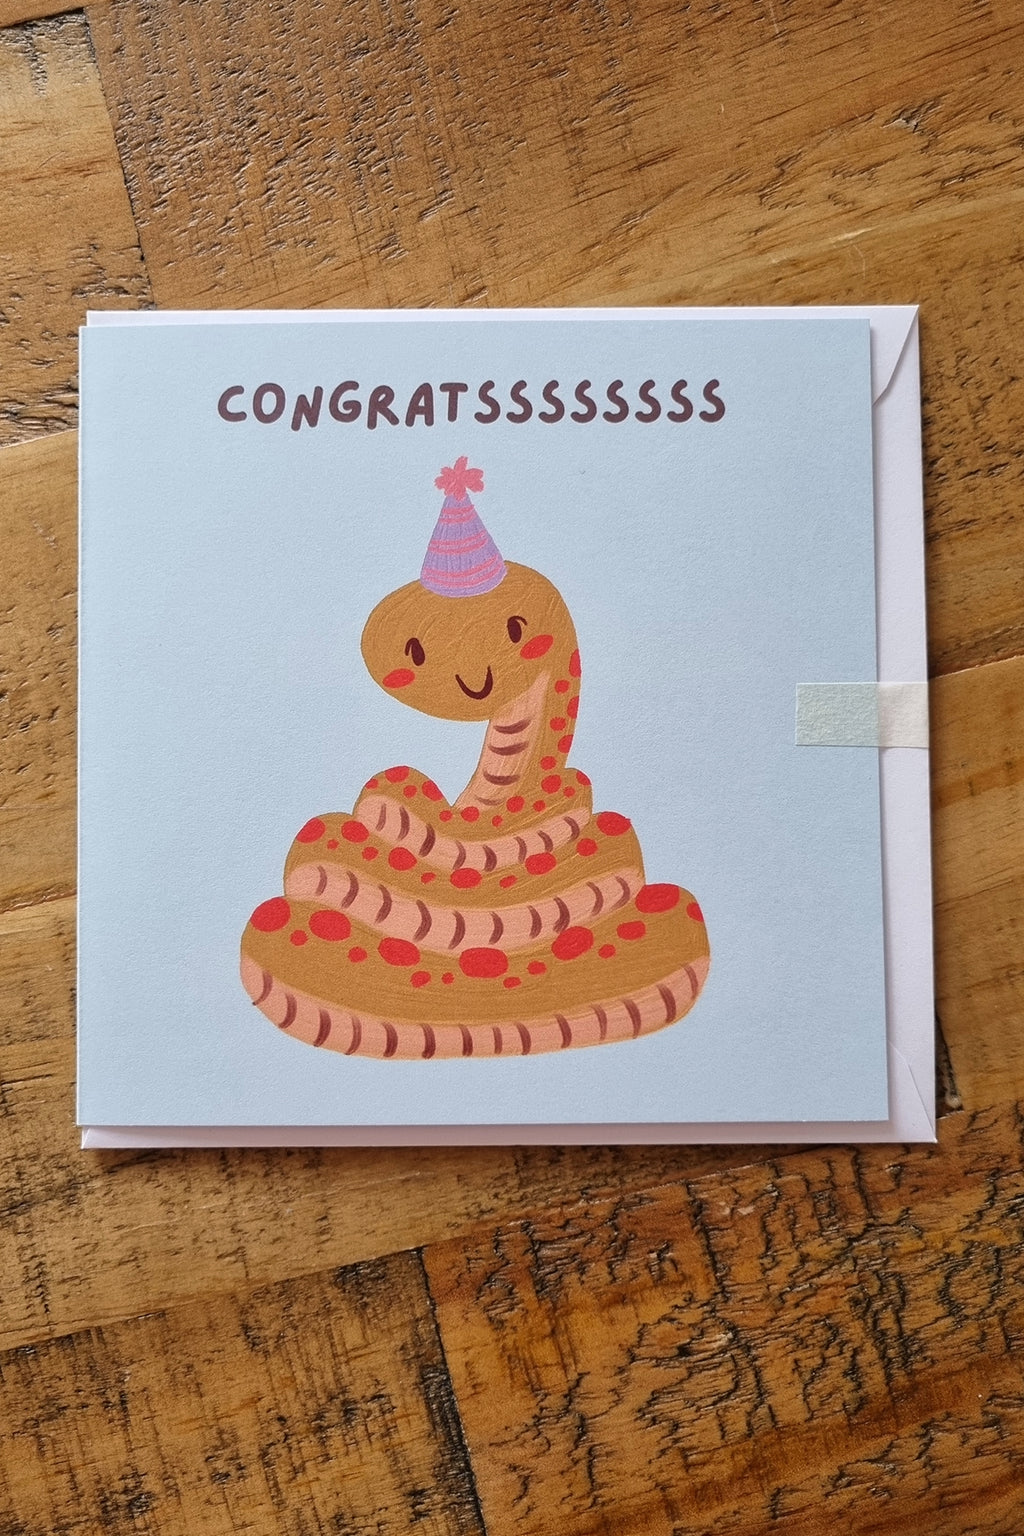 Want to send someone a little greeting? This vegan birthday greeting card is guaranteed to bring a smile on your special someone's face.